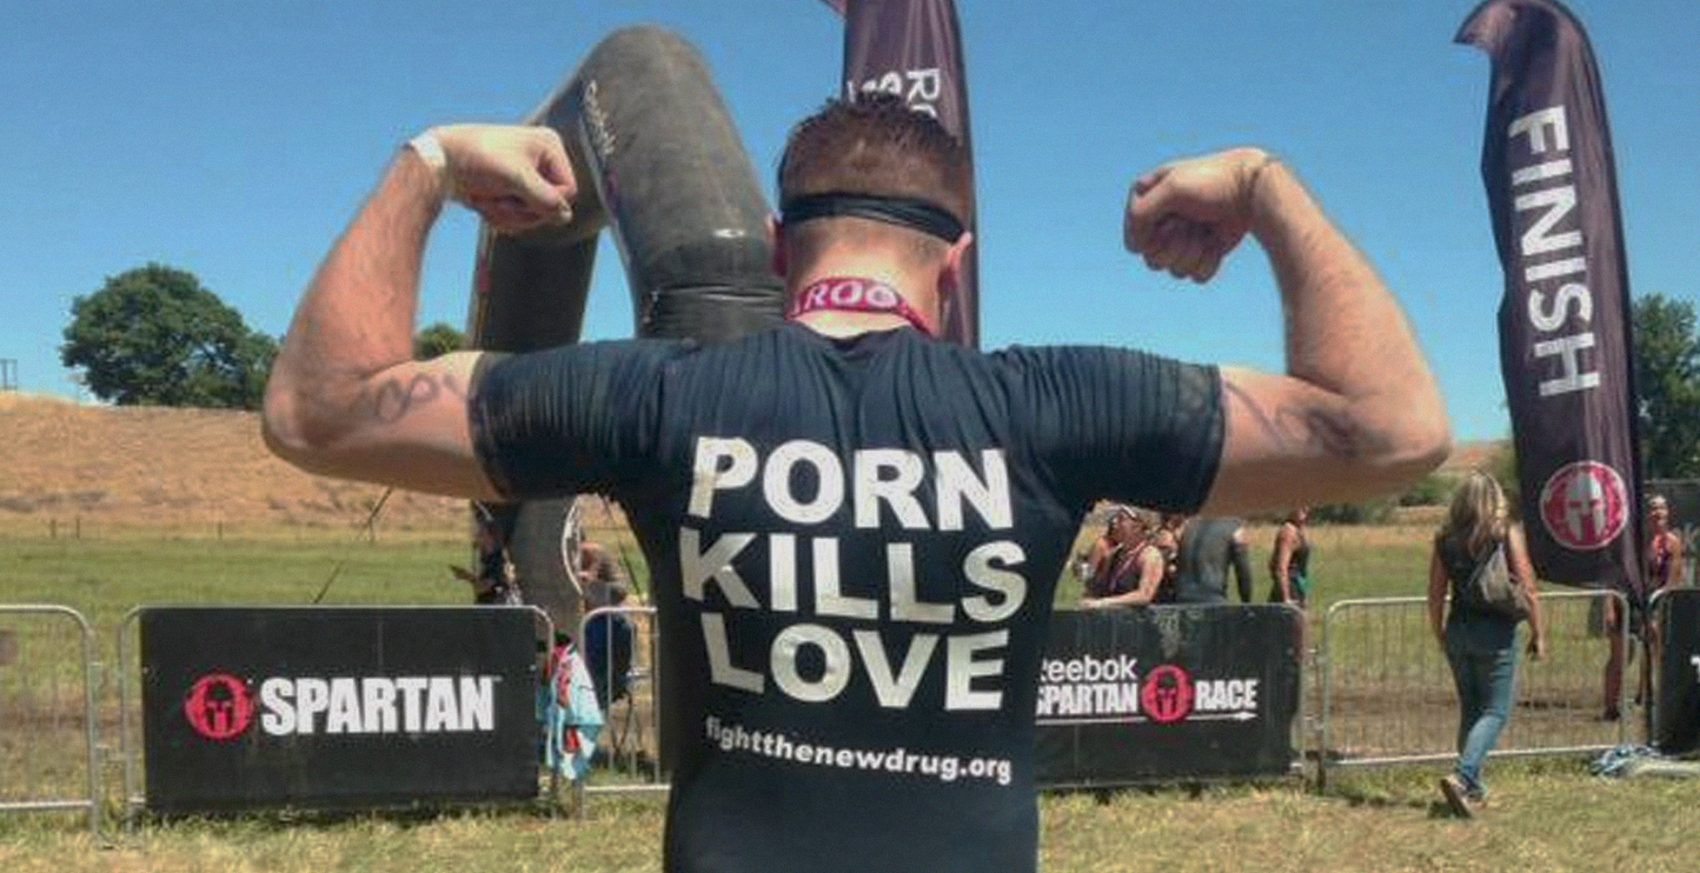 Spartan - This Guy Completed a Spartan Race Wearing a 'Porn Kills Love ...